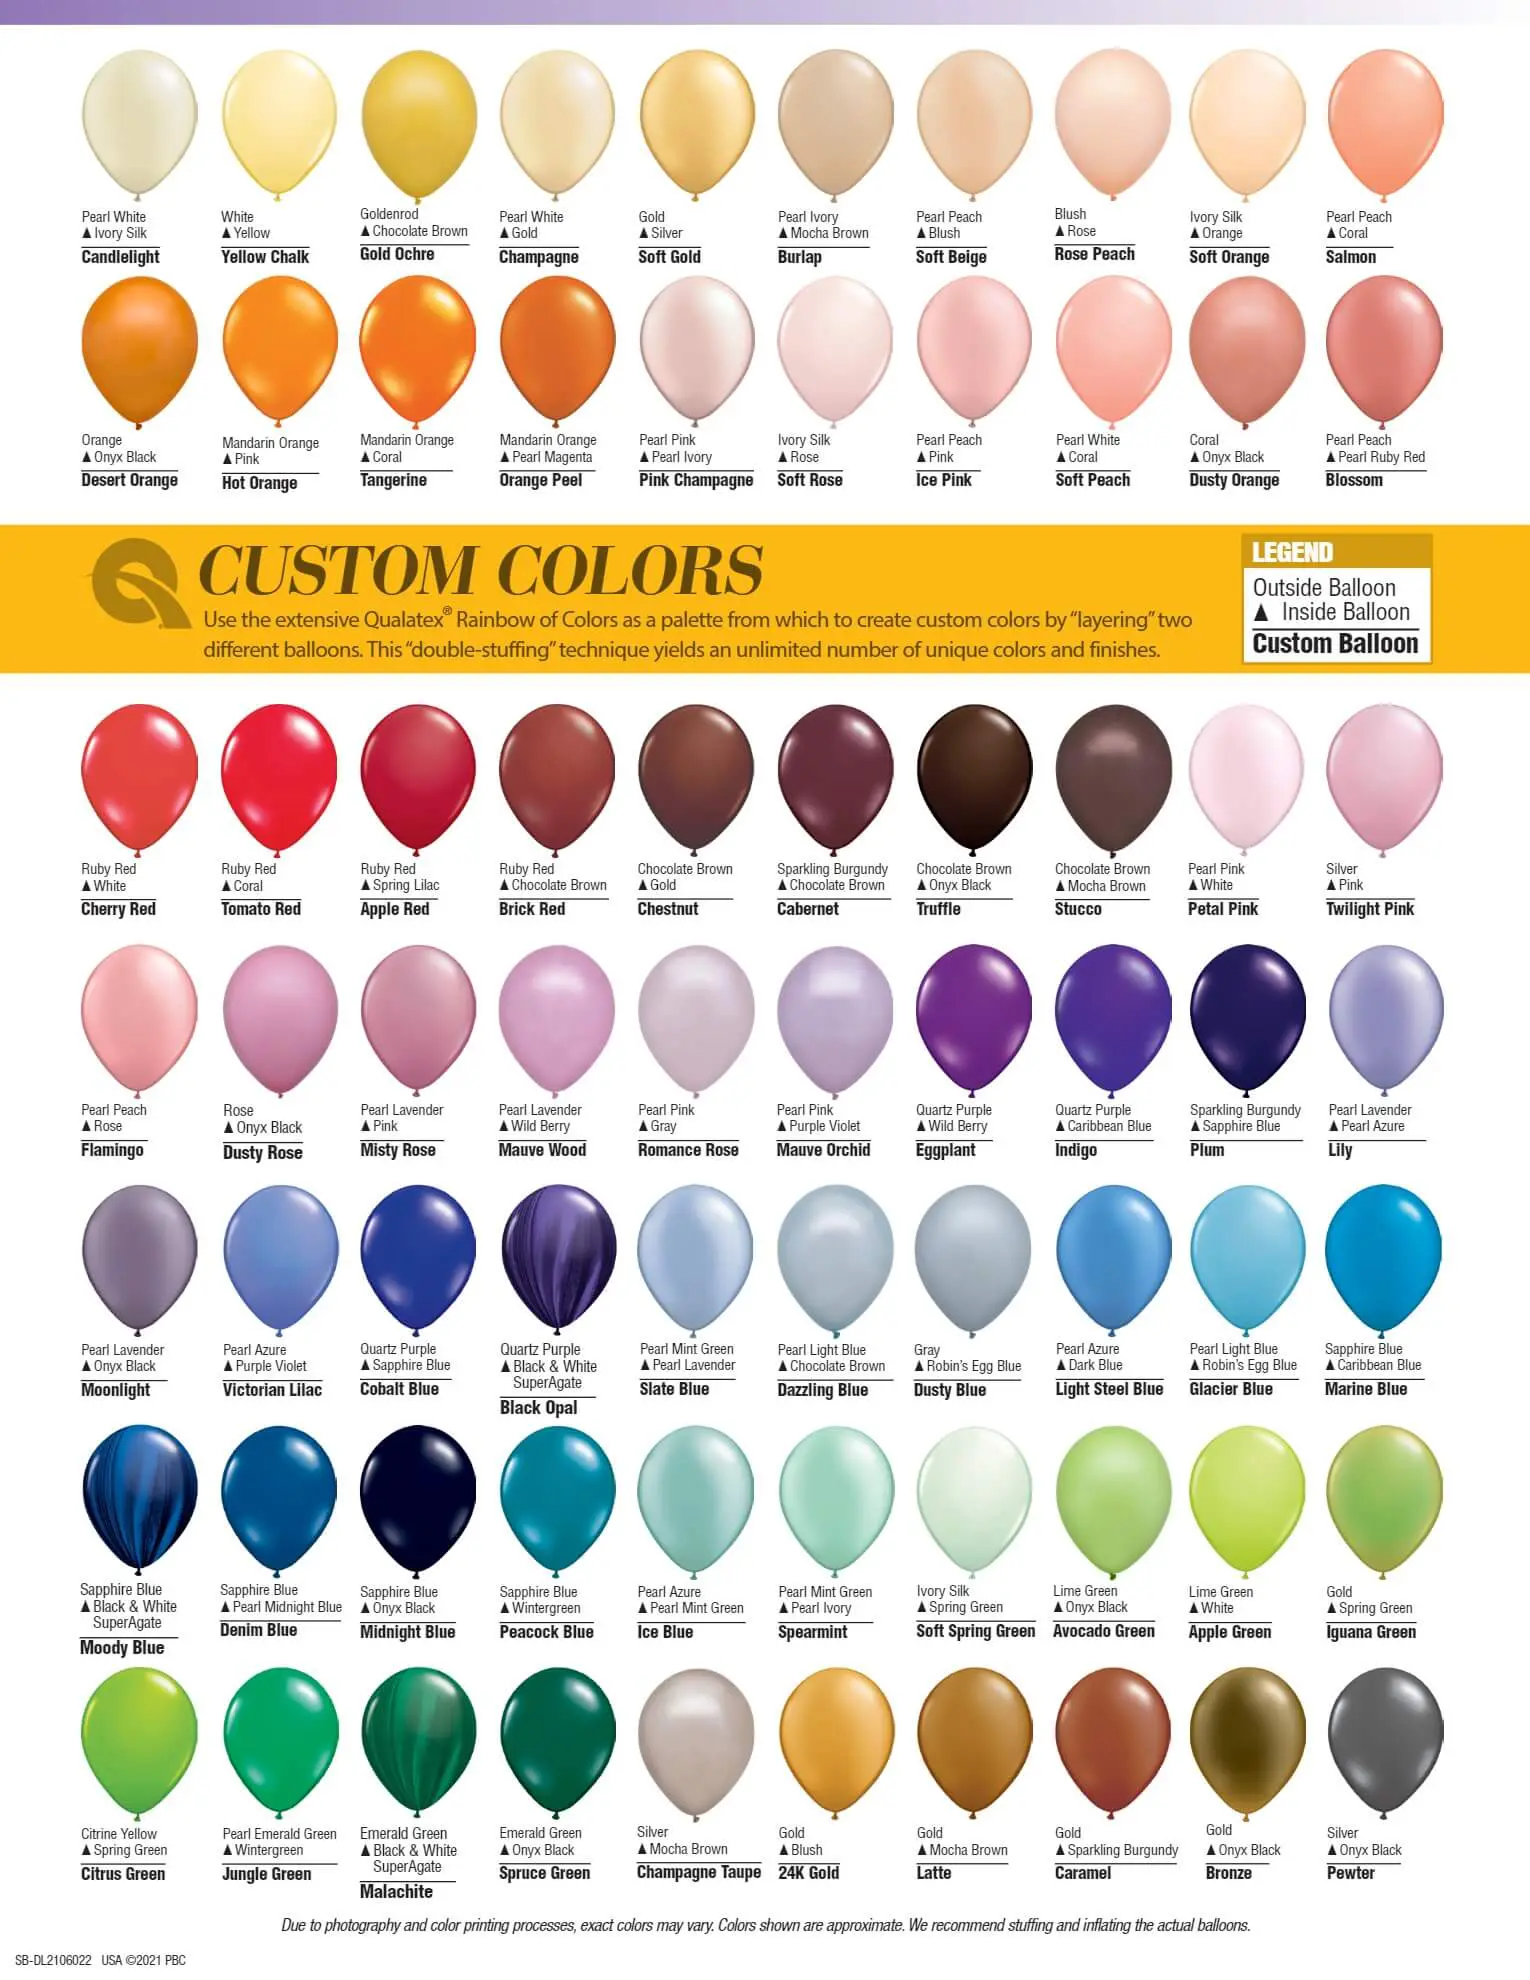 A color chart featuring various shades of latex balloons, with color swatches arranged in rows and columns.